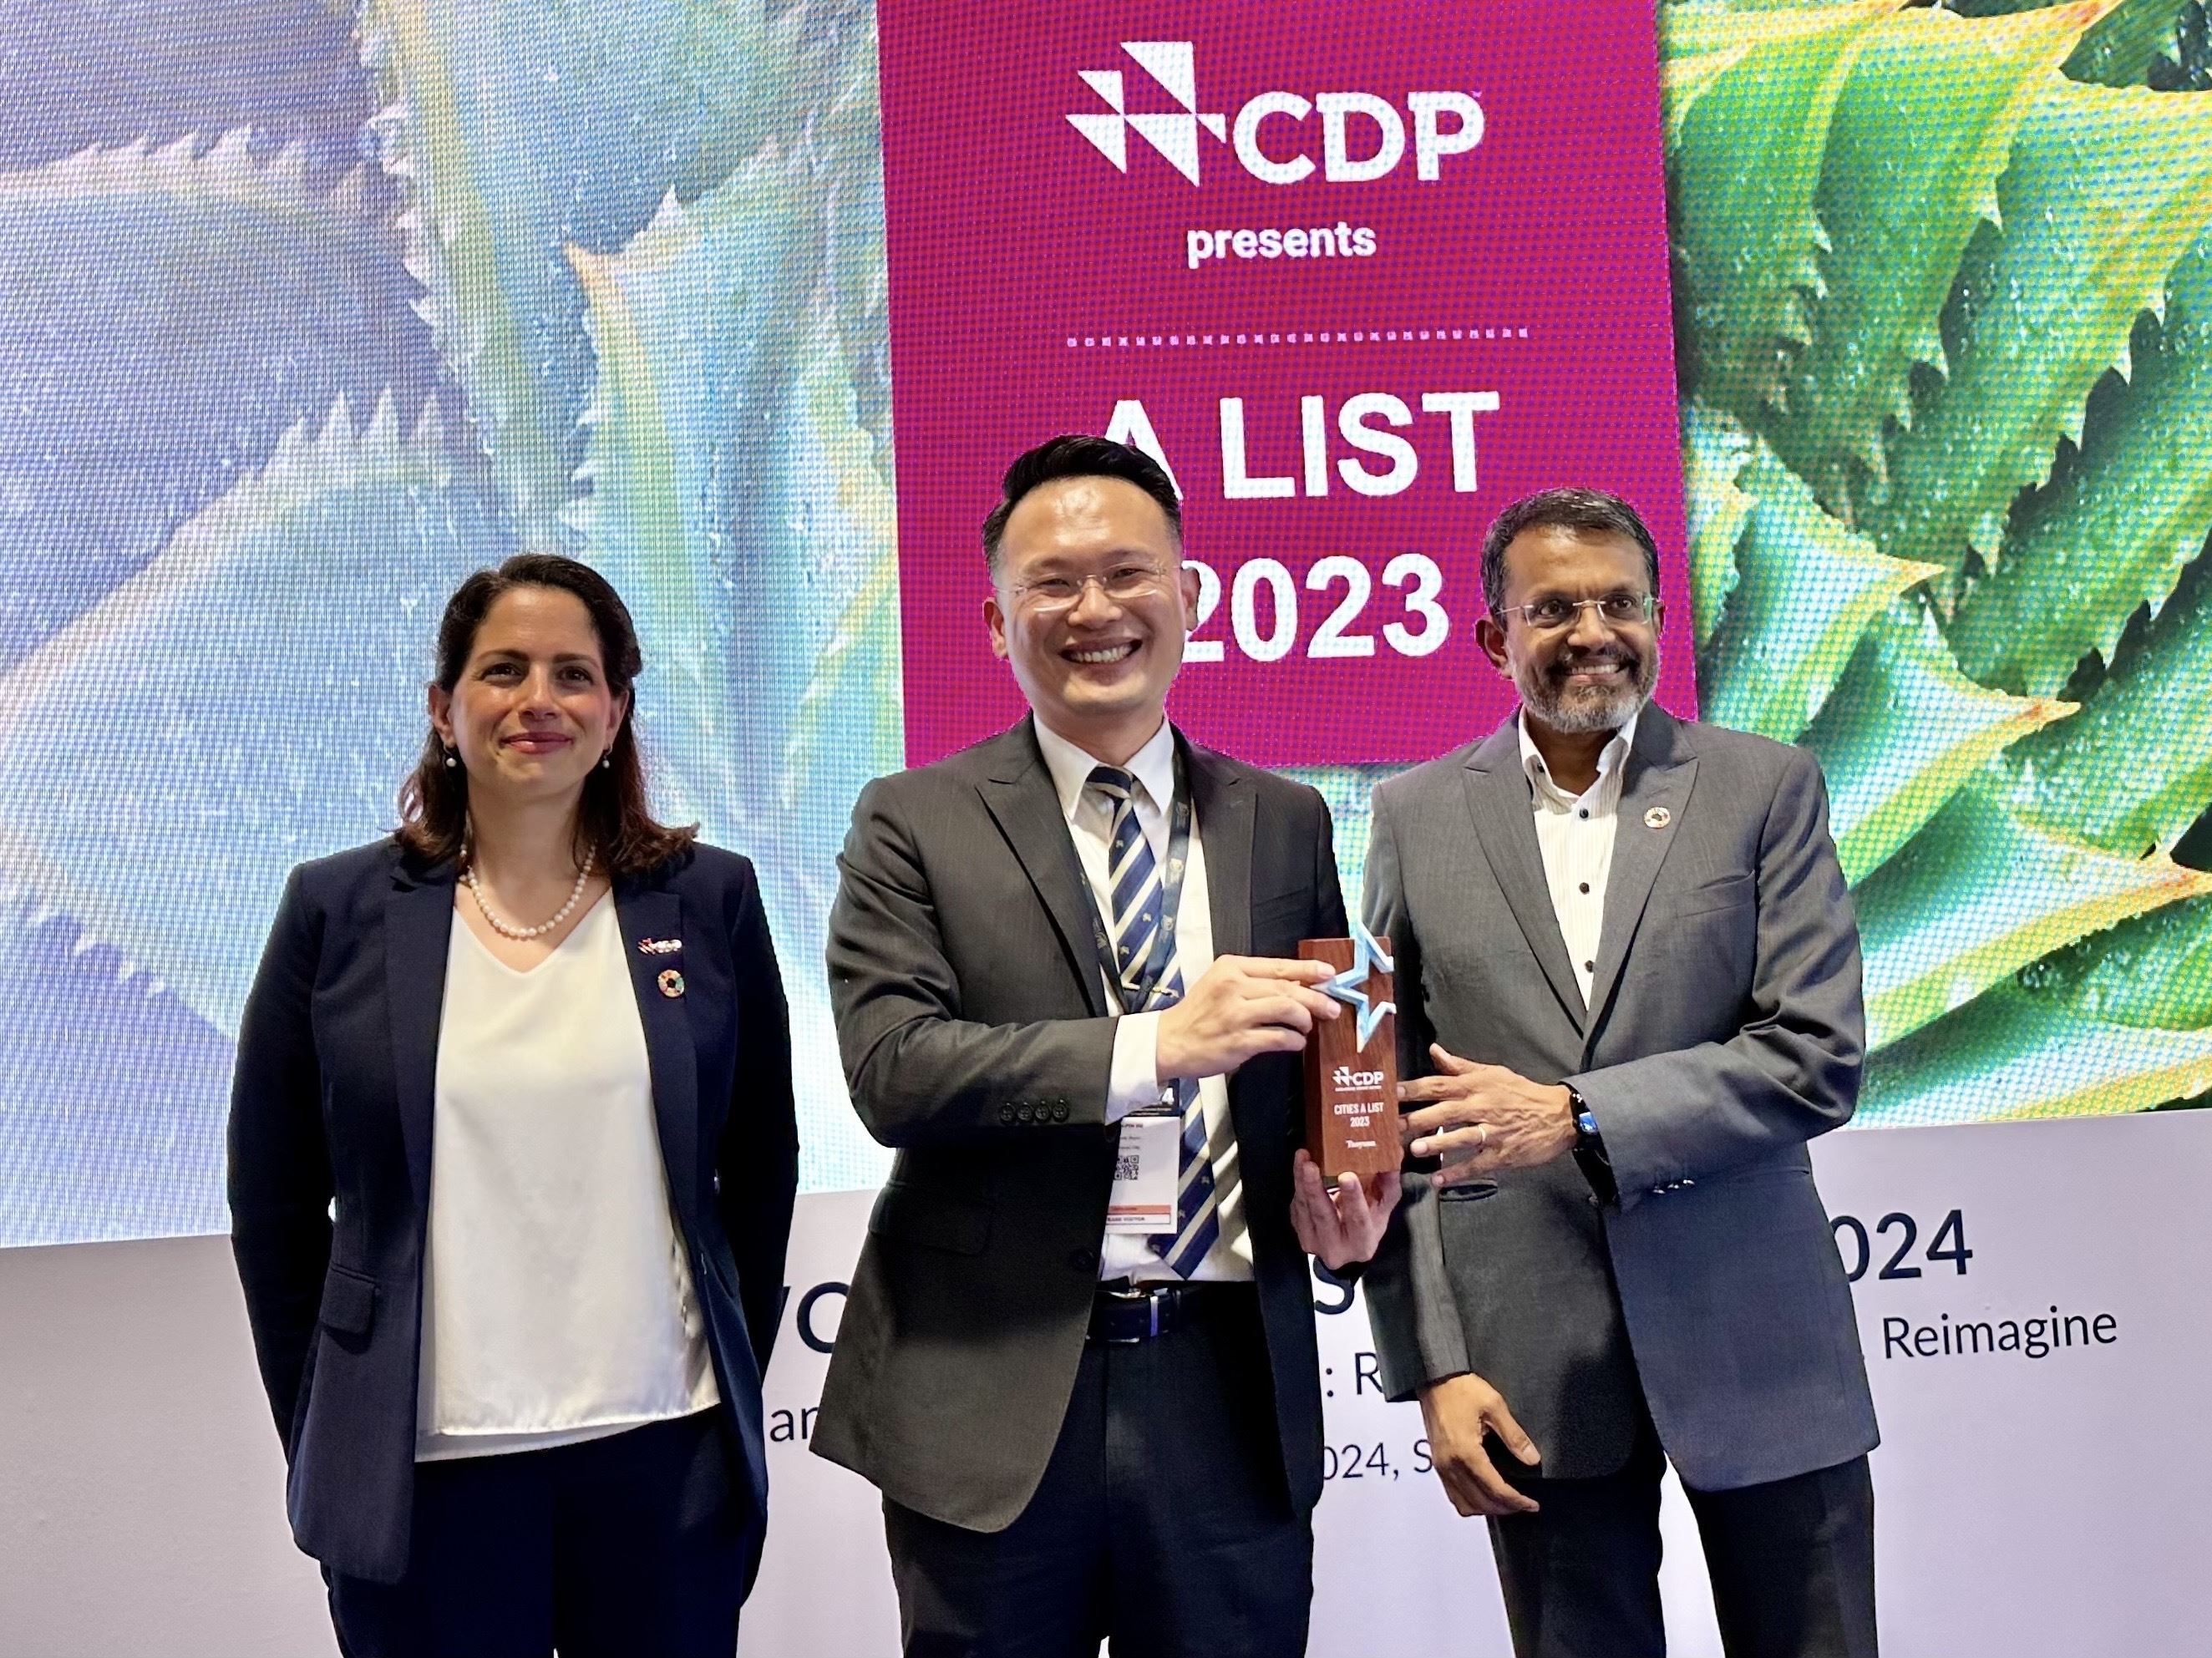 Taiwan’s Only Selected City: Taoyuan Achieves A-List City Status in the Carbon Disclosure Project ..